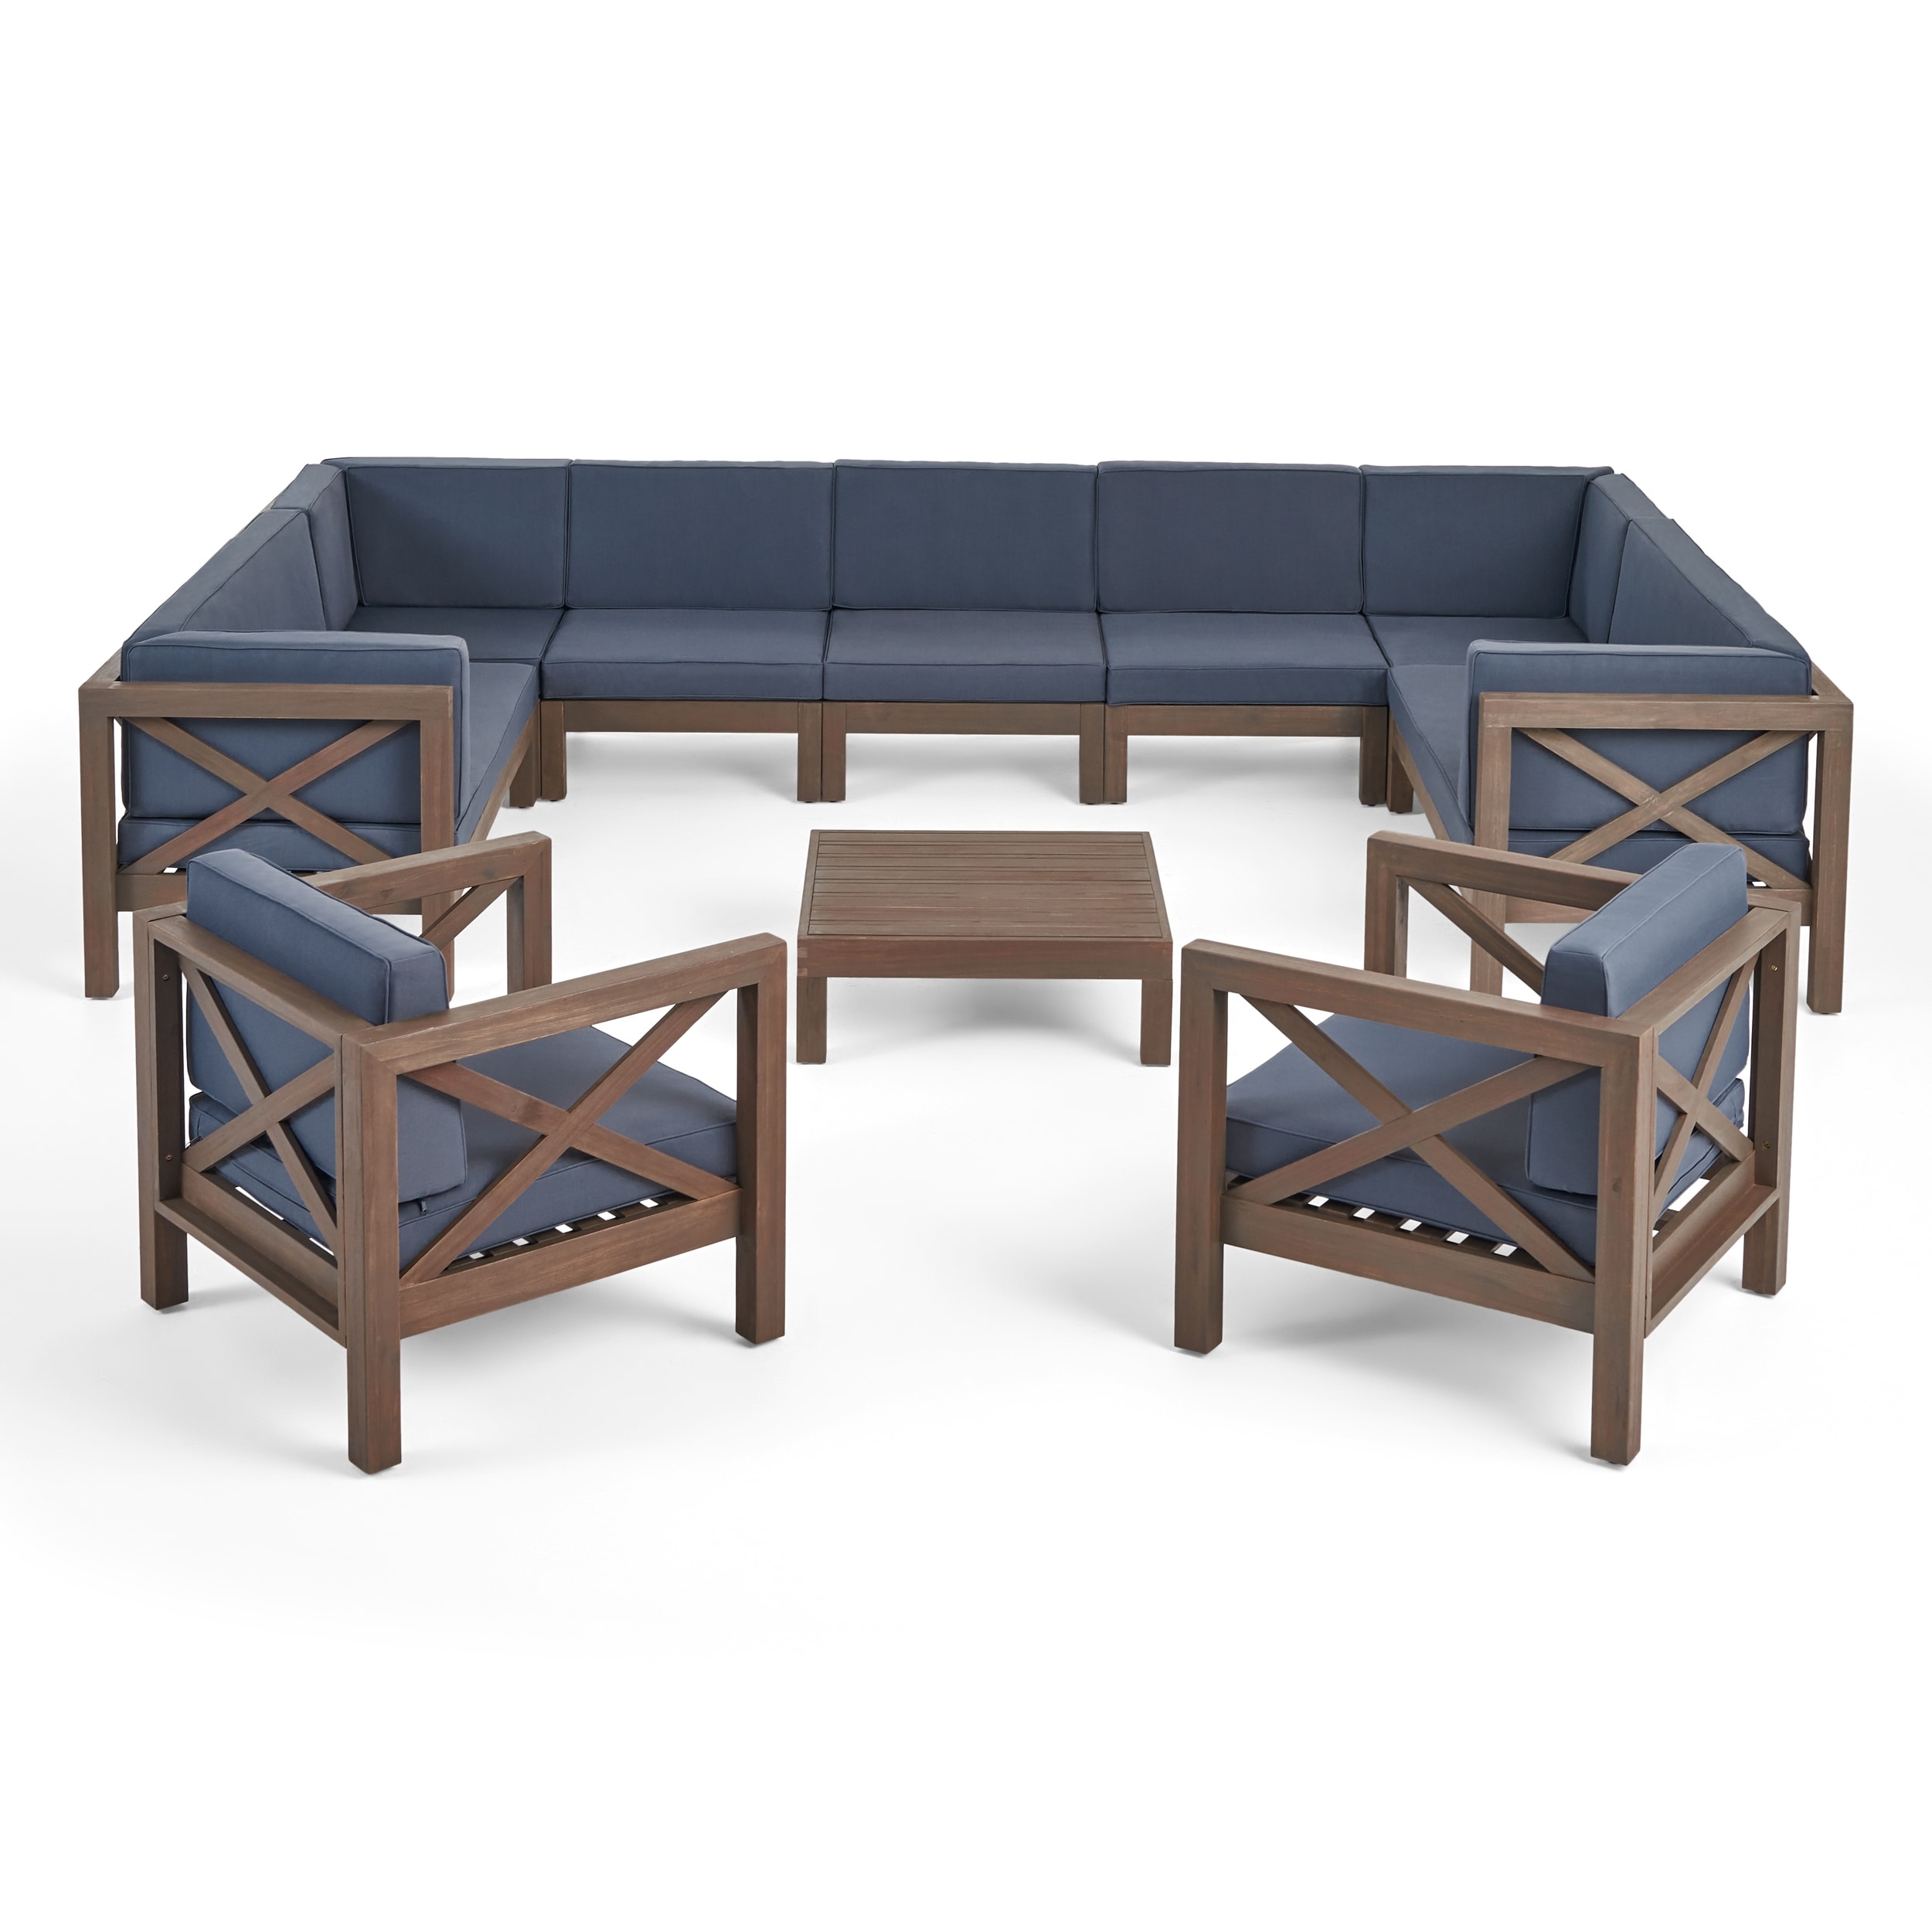 Brava Outdoor 11 Seater Acacia Wood Sectional Sofa And Club Chair Set By Christopher Knight Home